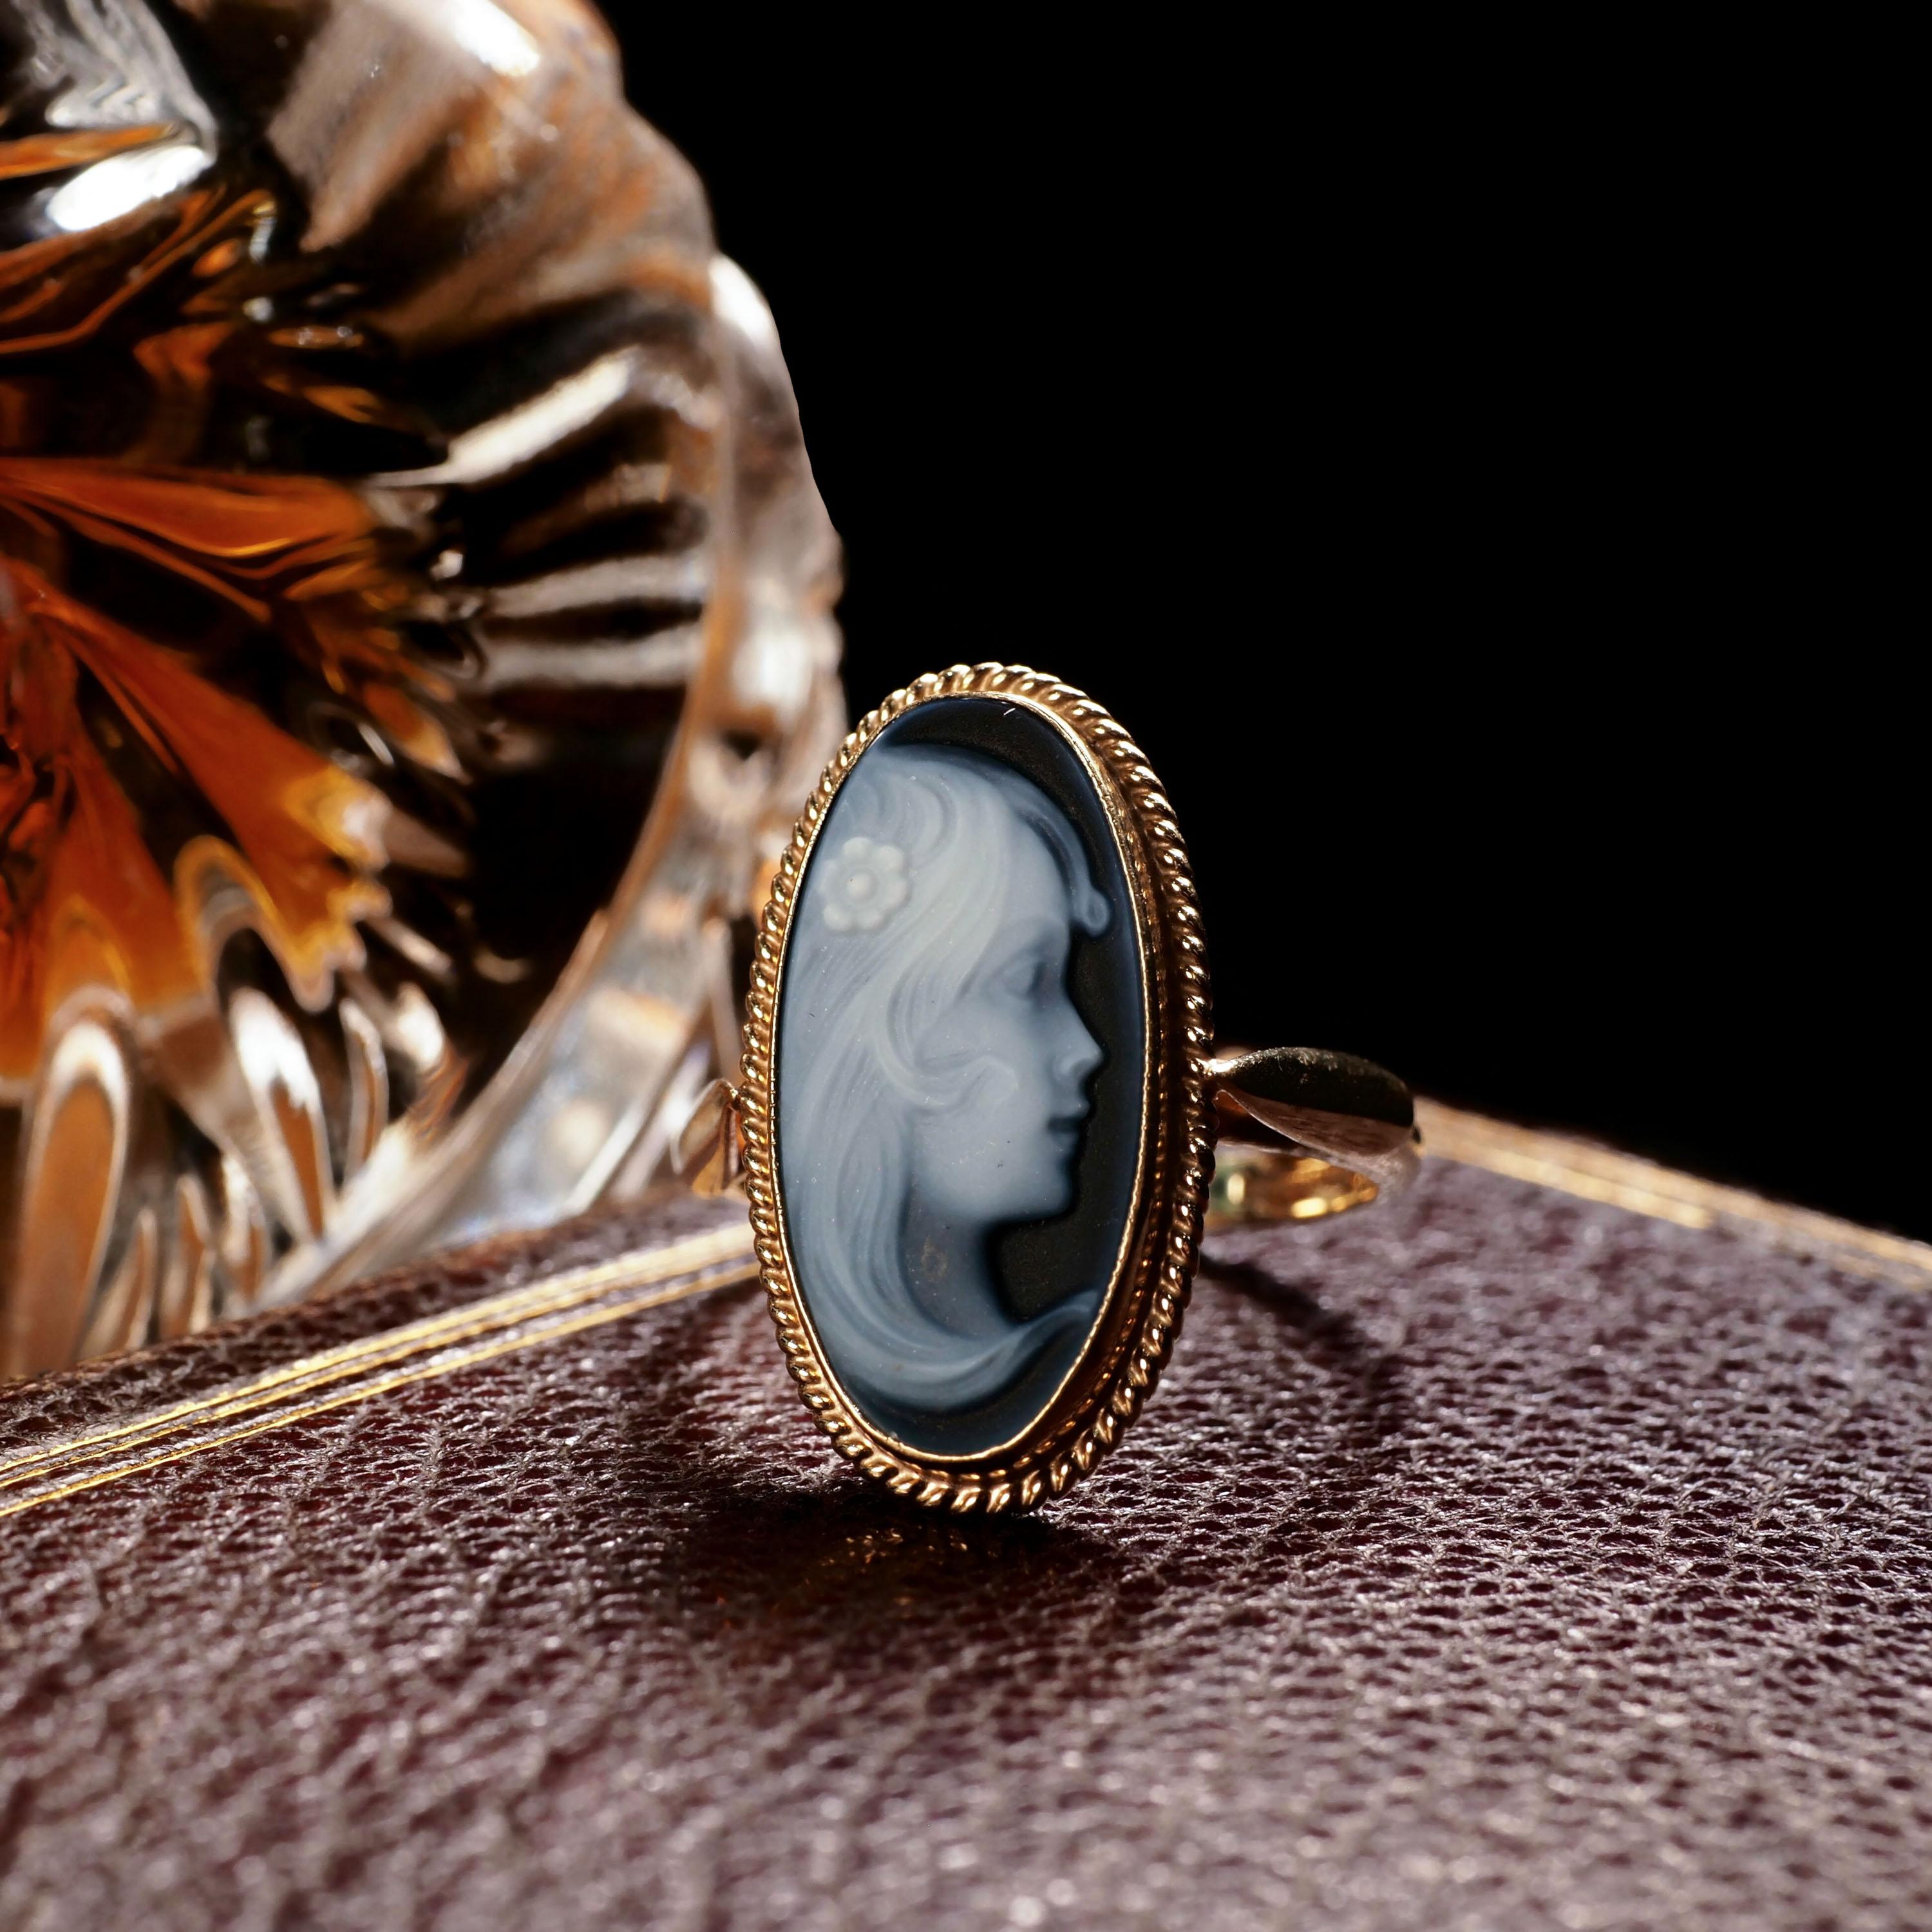 We are delighted to offer this wonderful vintage 9K cameo ring made in Birmingham, England.
 
The ring features a dark blue agate cameo that is mounted in a solid 9K gold setting. 
 
The central figurehead presents a very fine and beautiful face of